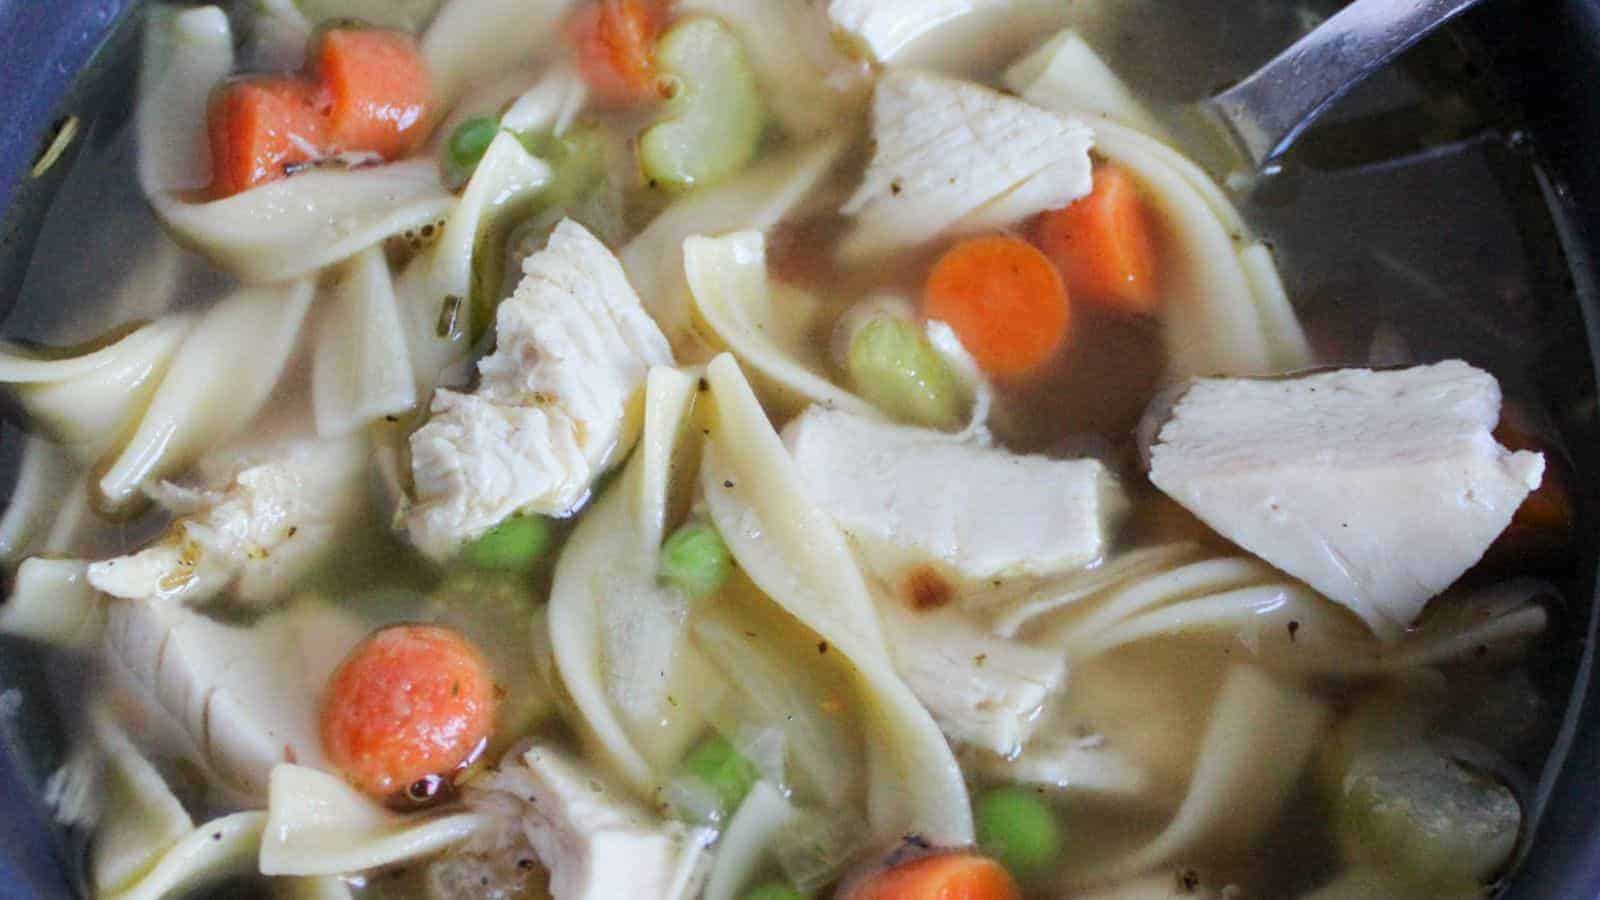 A bowl of chicken noodle soup with vegetables.